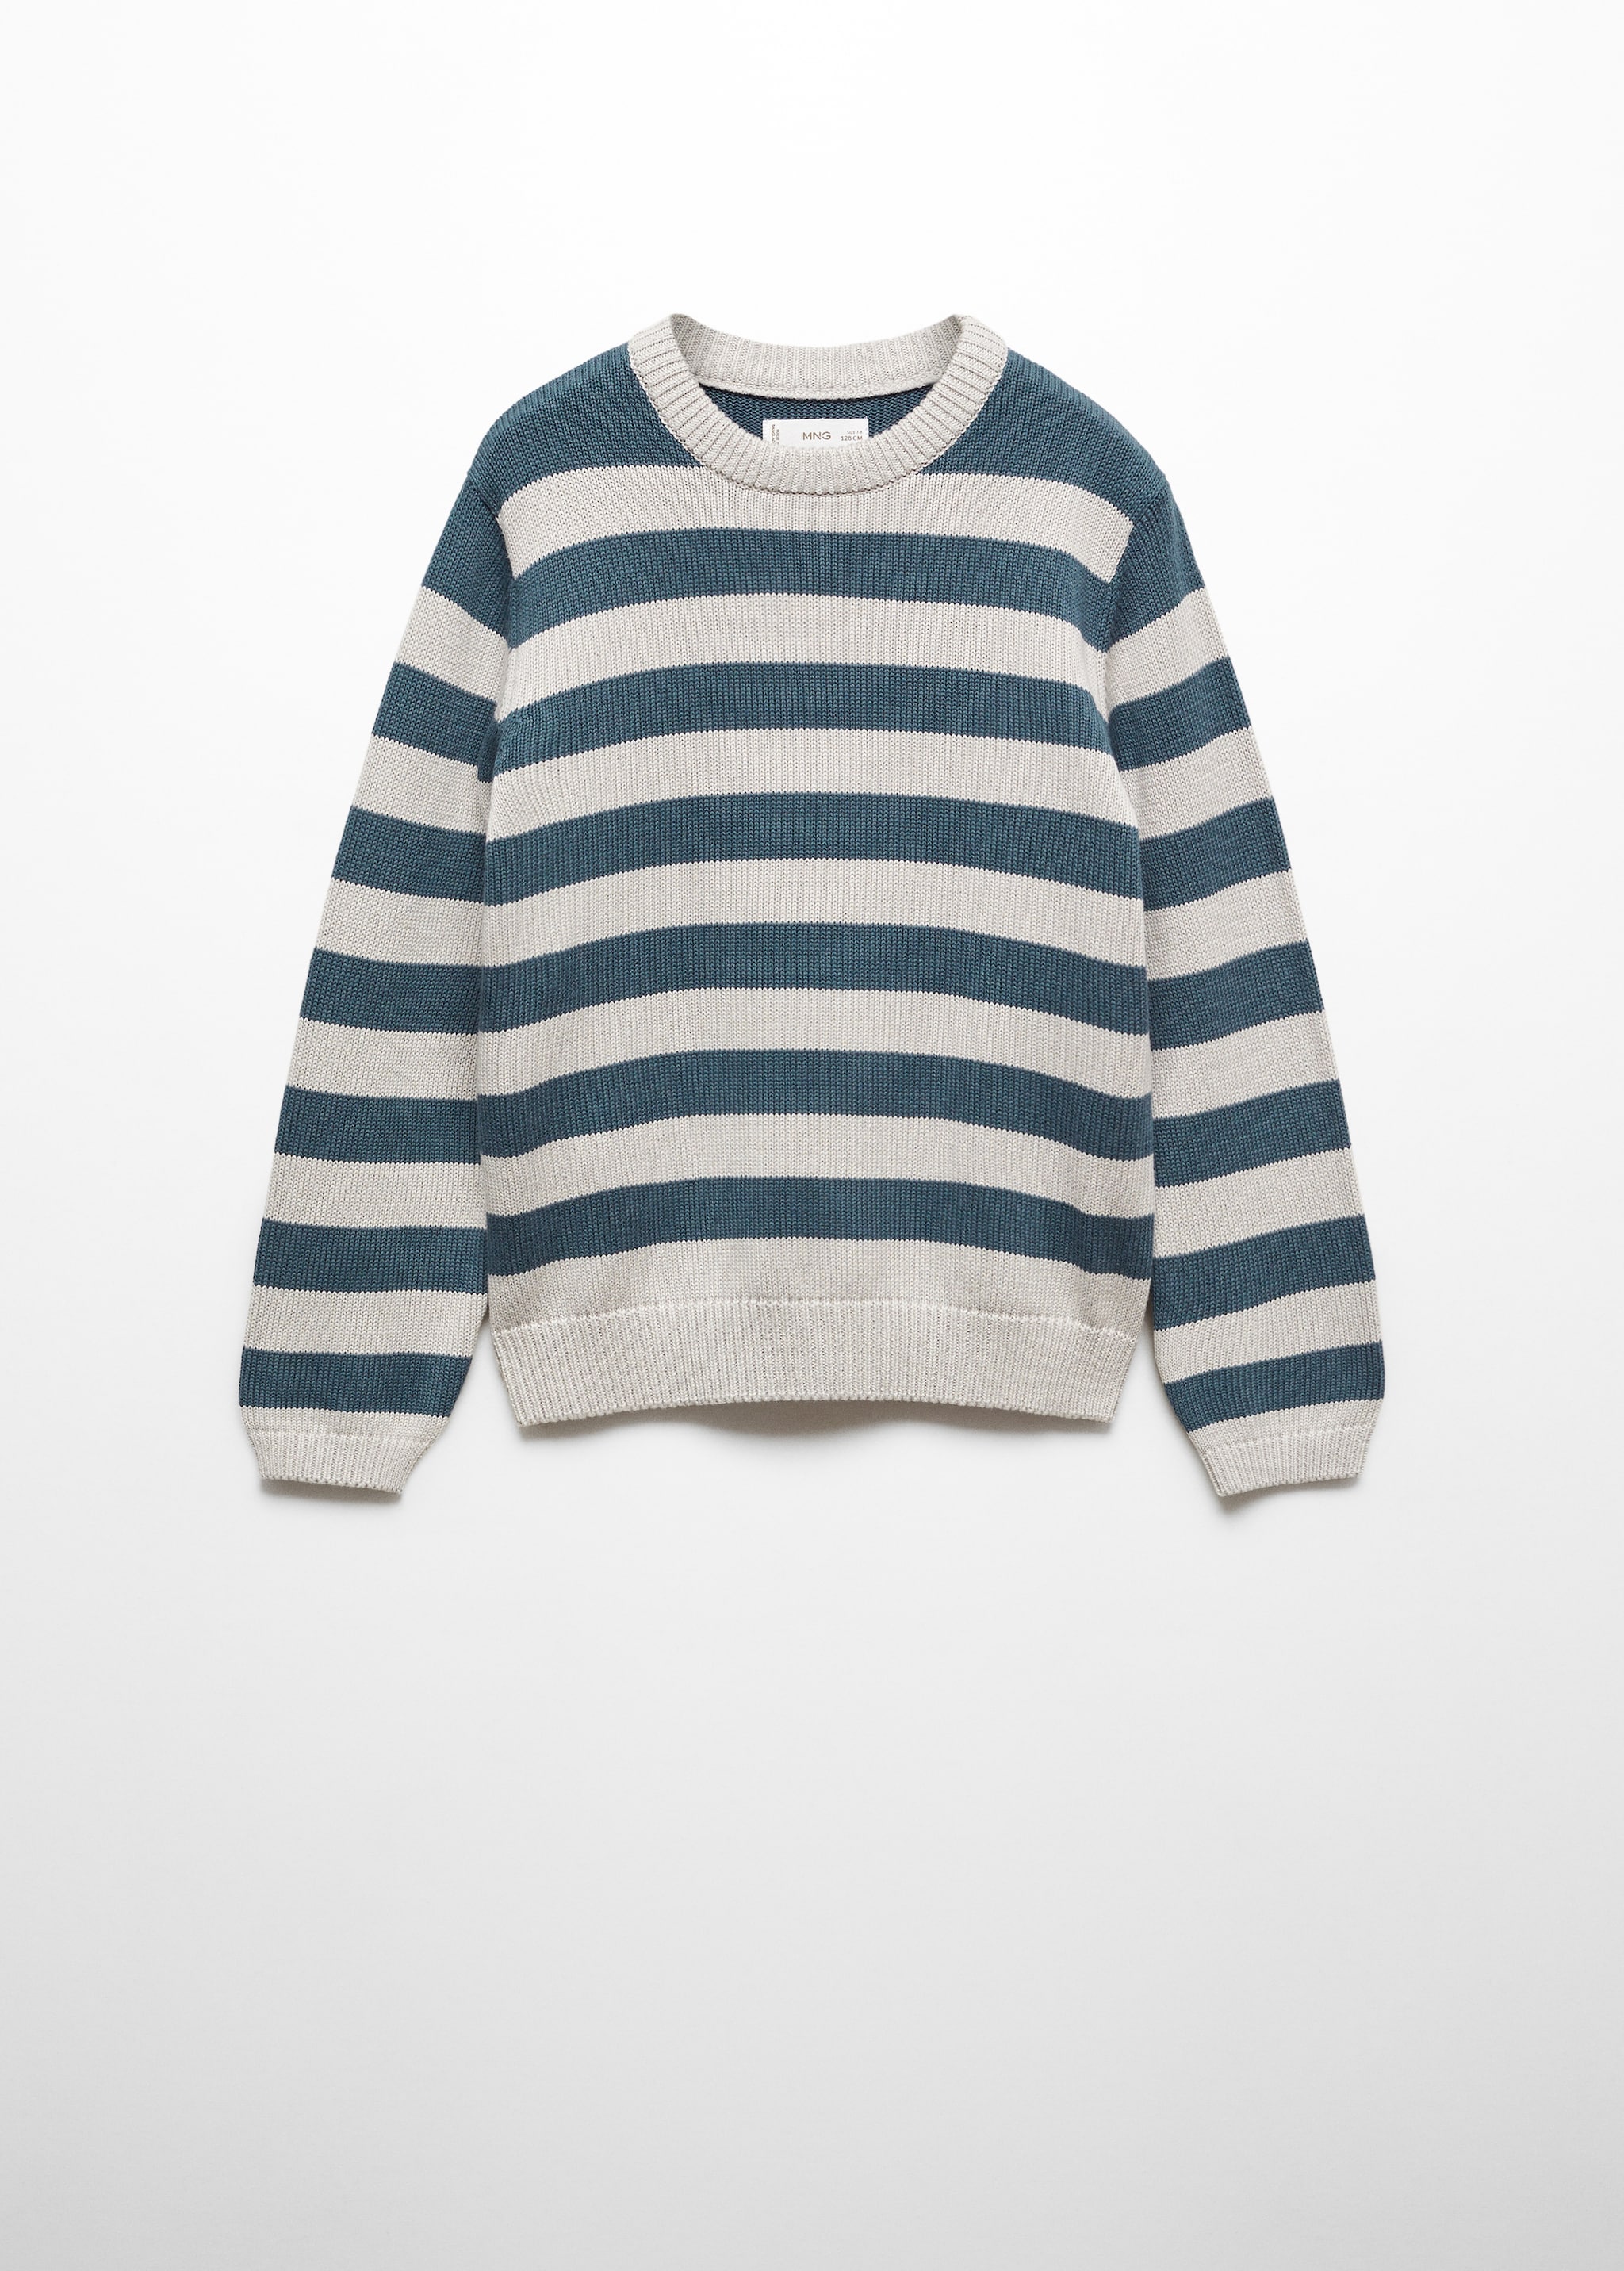 Striped knit sweater - Article without model